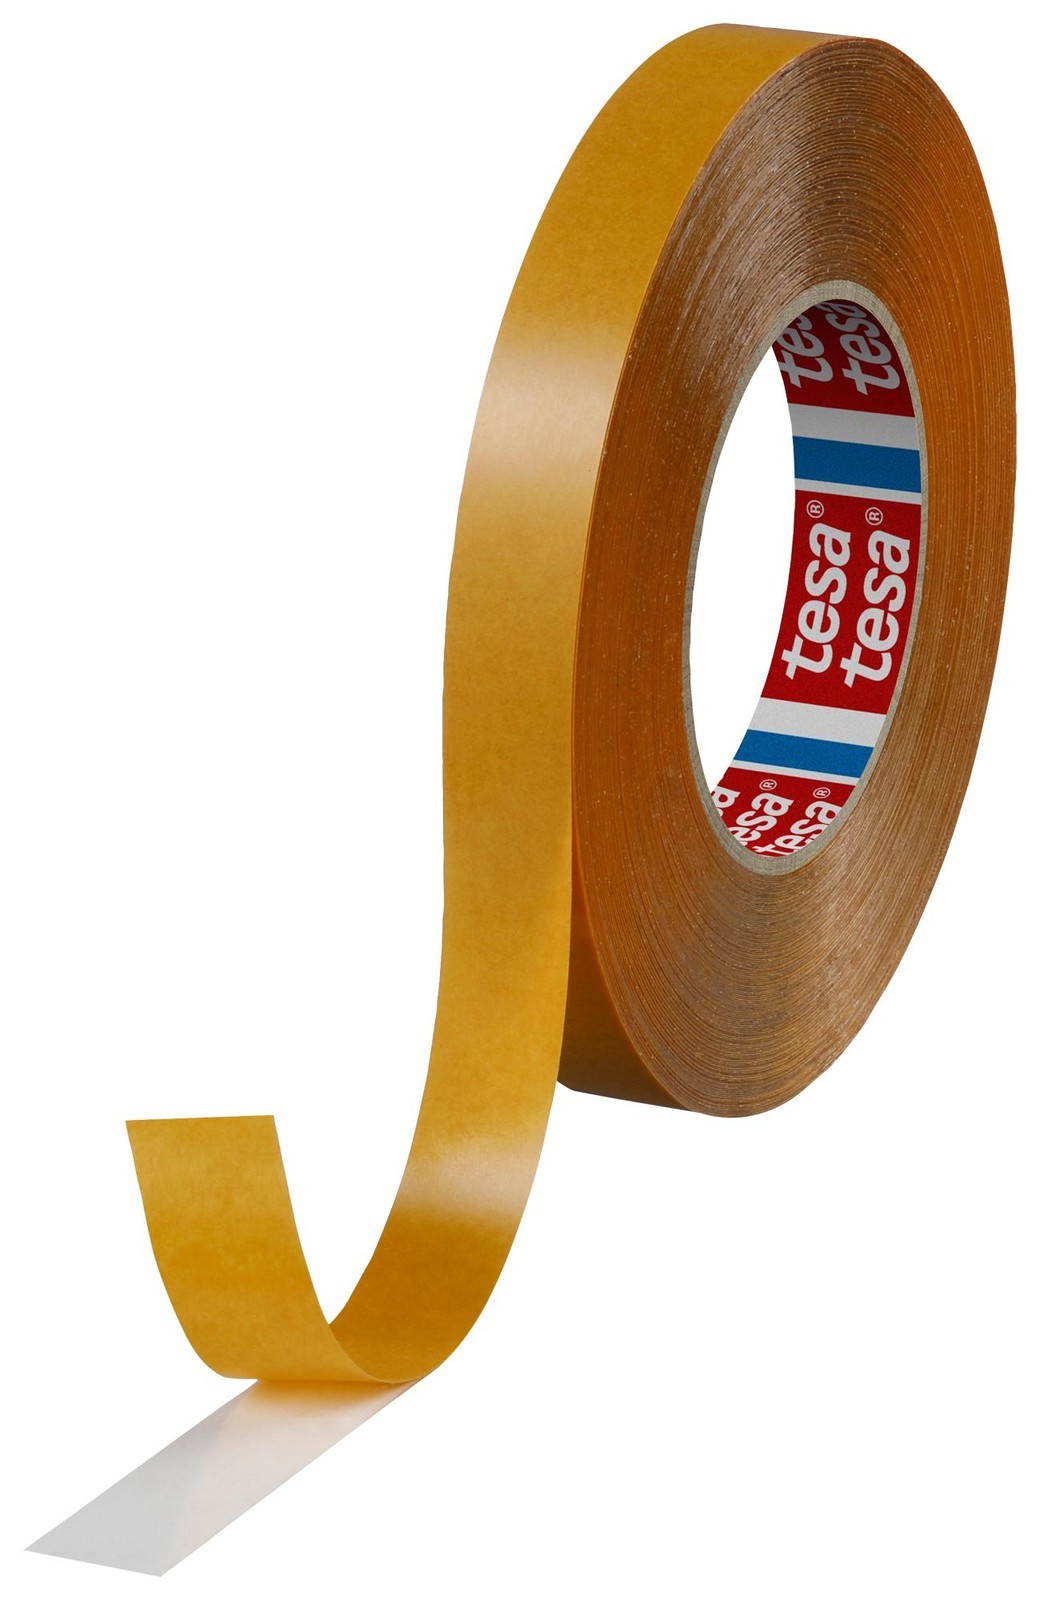 Tesa 51970-00022-00 Double Sided Tape, Pp, 50M X 19mm